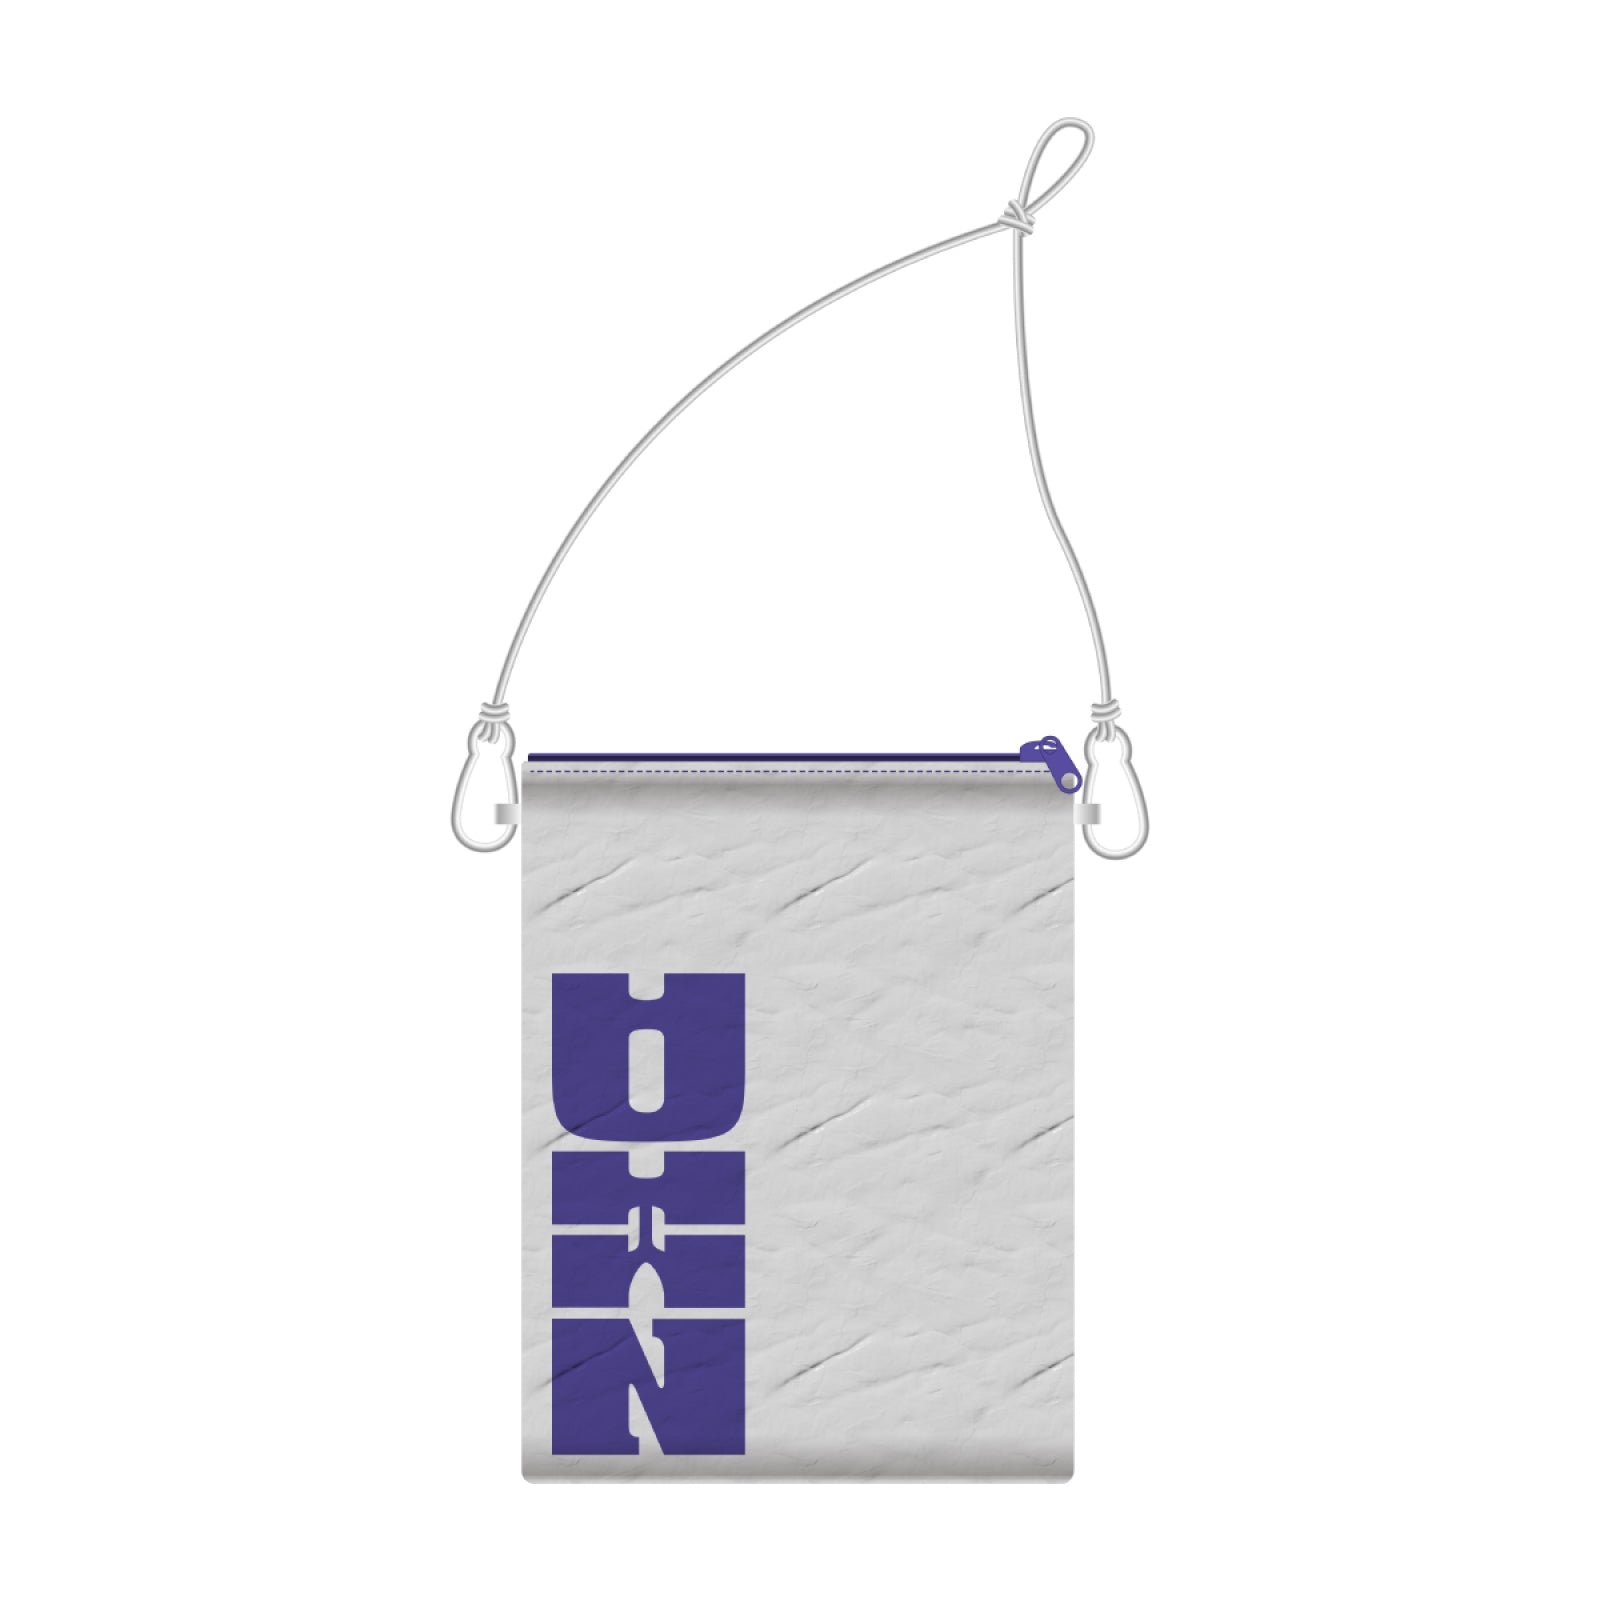 DKZ - 5TH ANNIVERSARY POP-UP OFFICIAL MD MINI POUCH